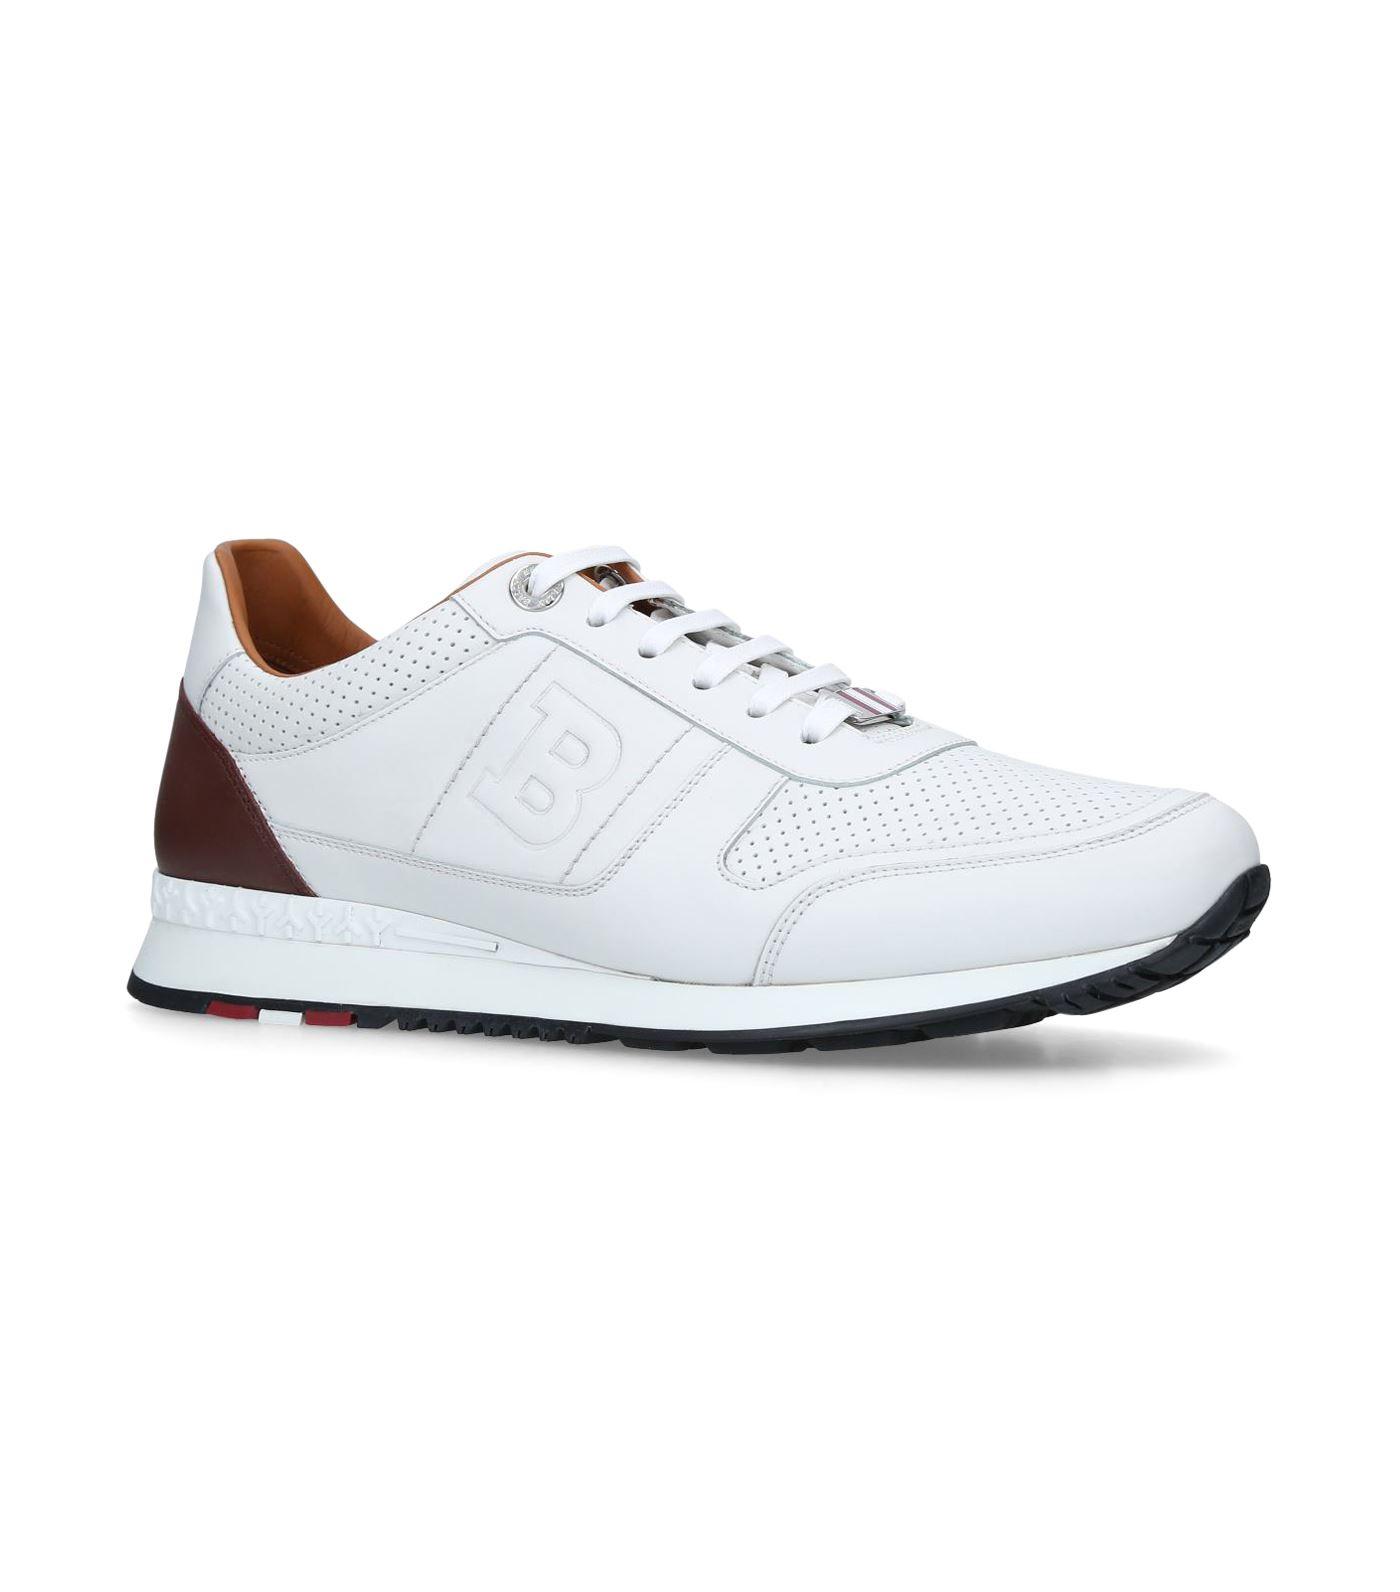 Bally Leather Asony Sneakers in White for Men - Lyst